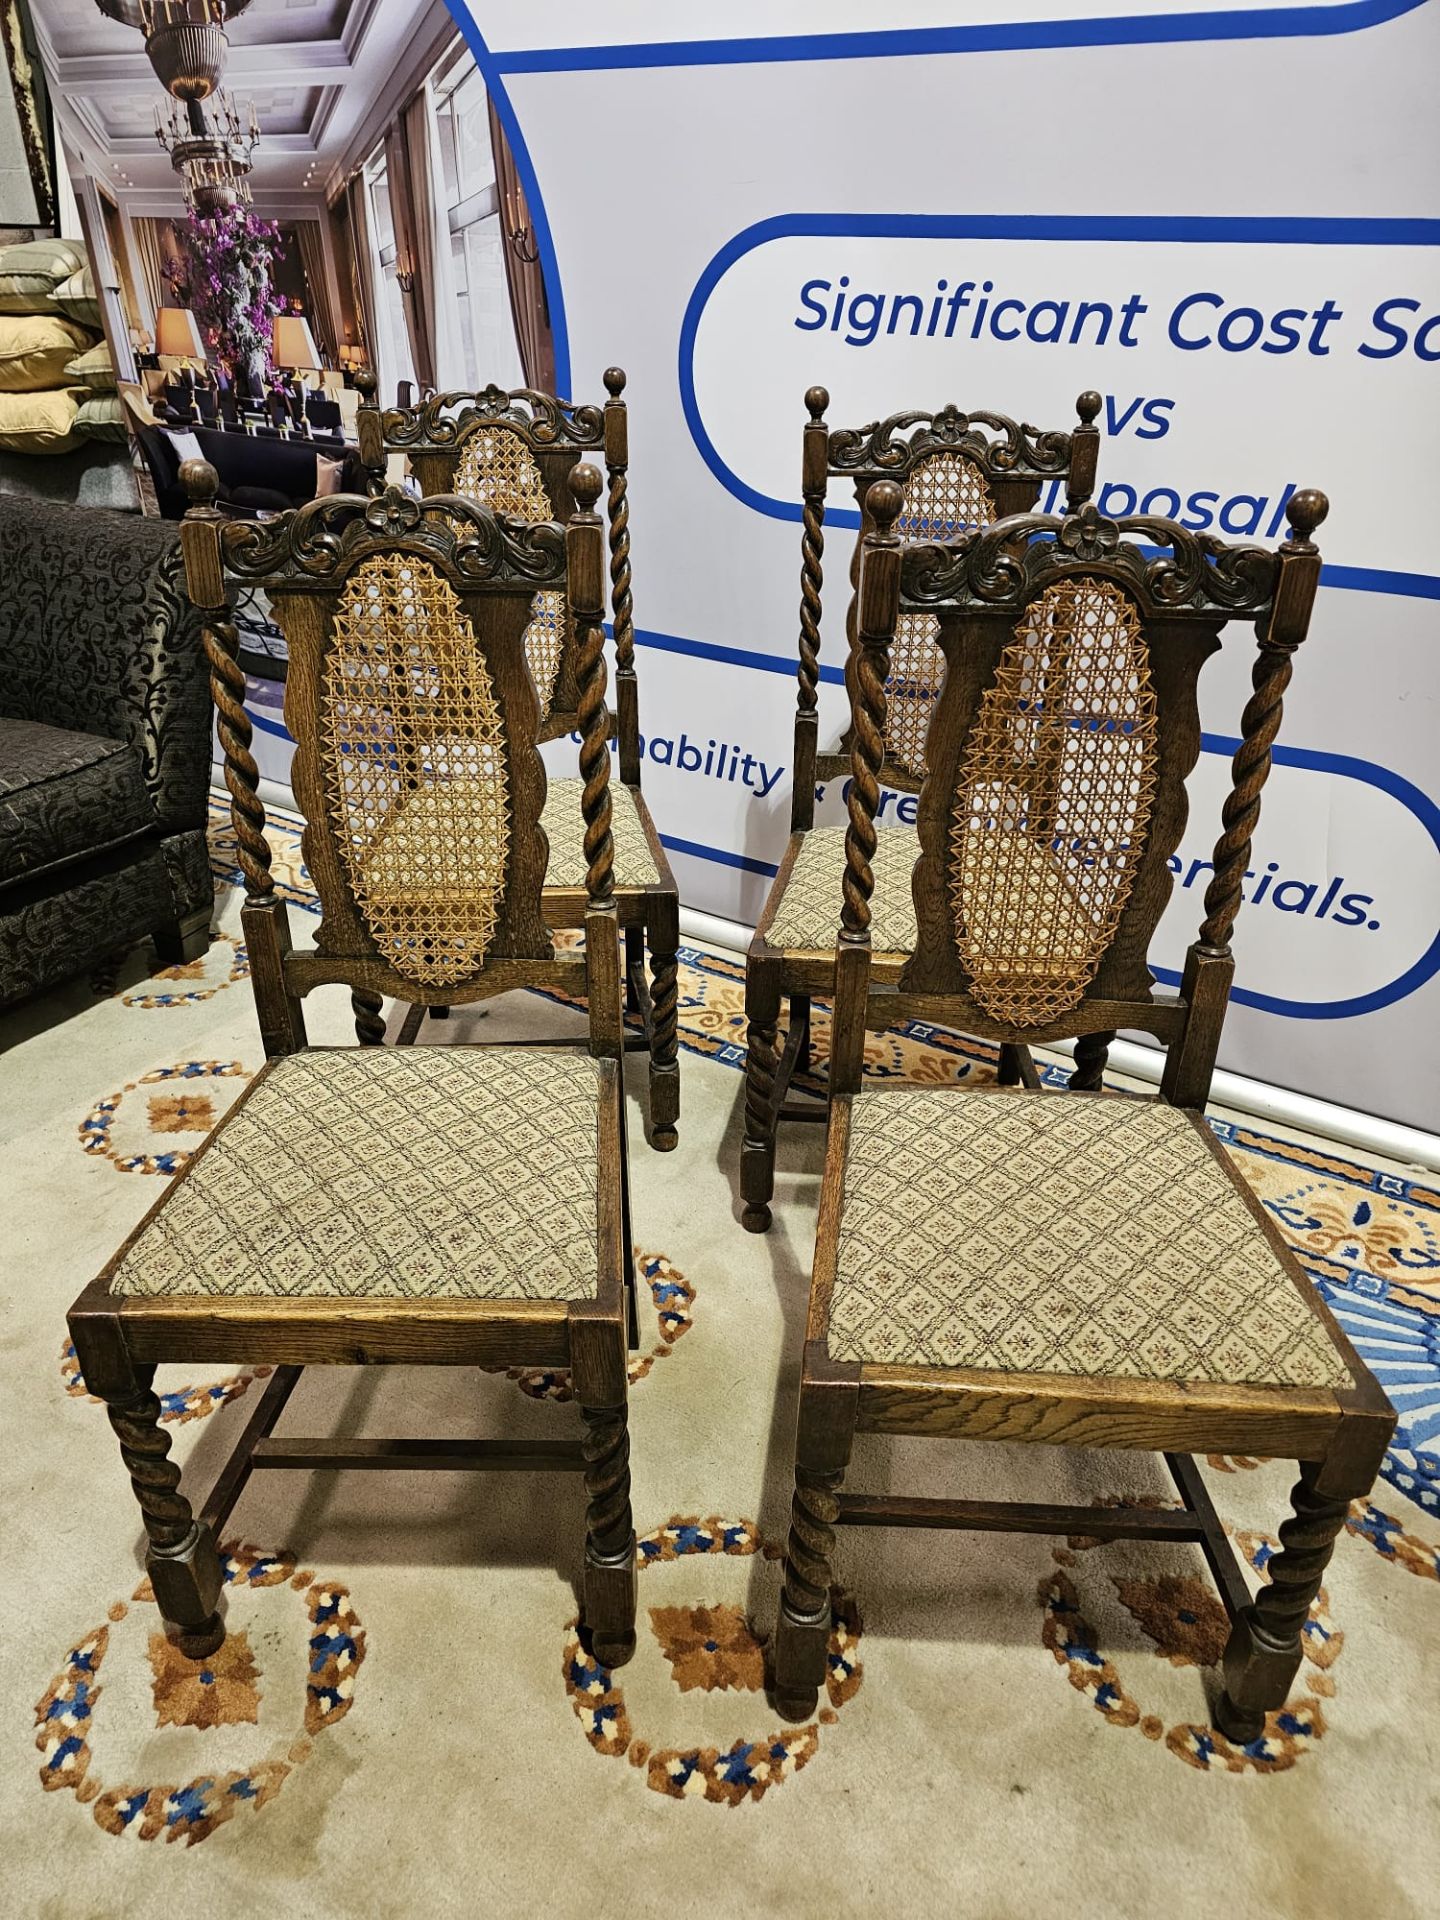 4 x Oak Chairs Featuring carved backrests with ovoid cane panels above upholstered seats and